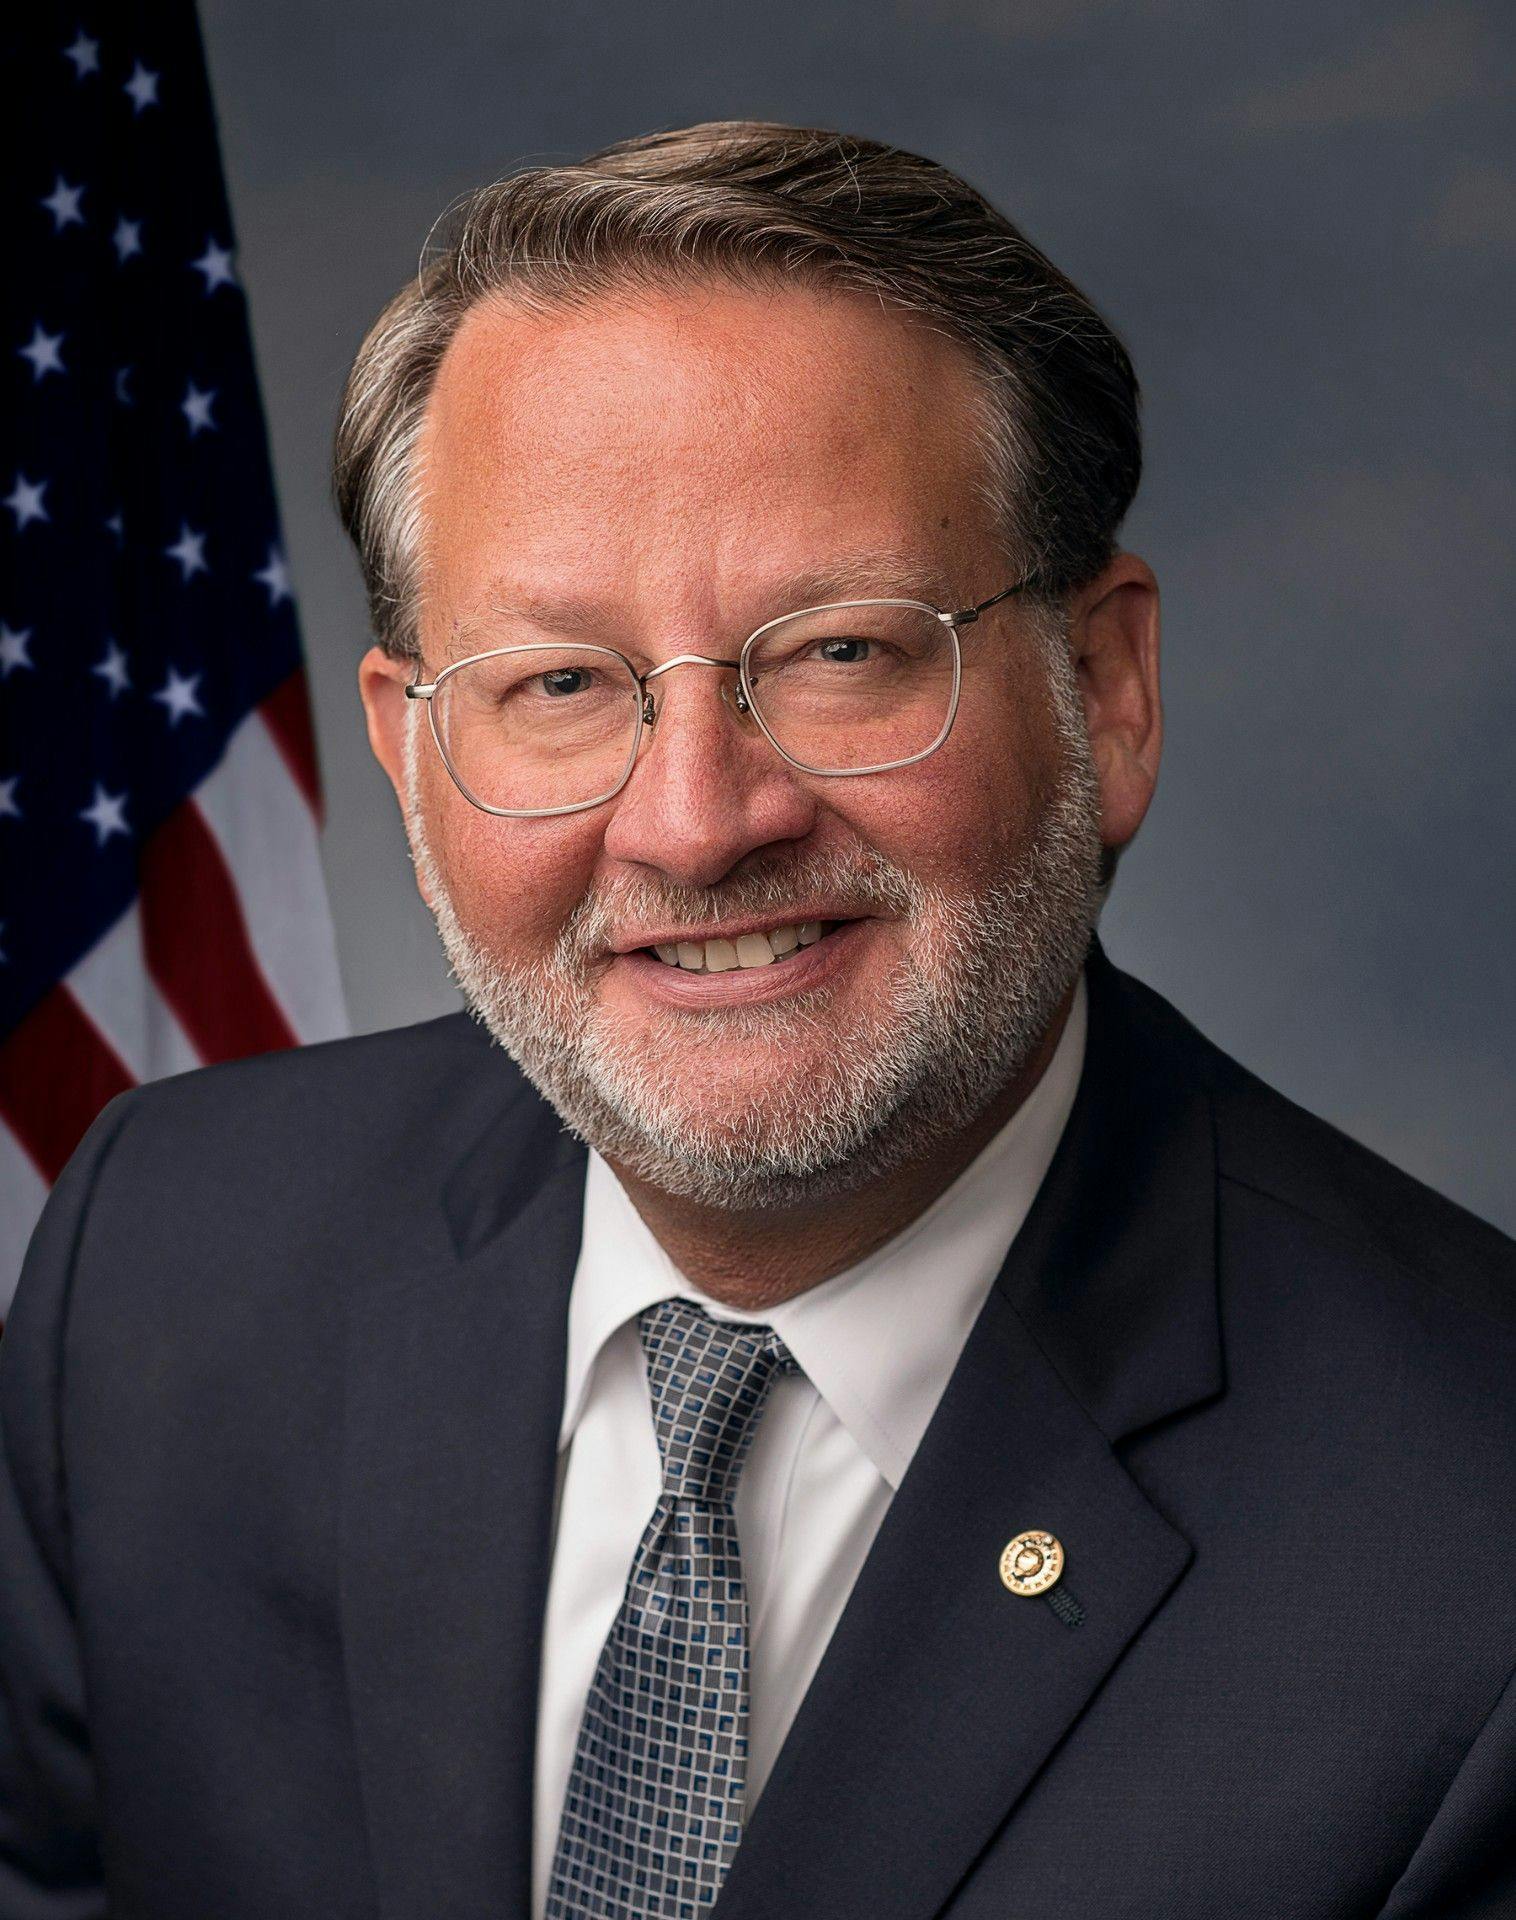 U.S. Sen. Gary Peters, D-Mich., and other Michigan lawmakers are pressing the FDA to take action to deal with the shortage of some cancer drugs. (Photo: U.S. Senate)